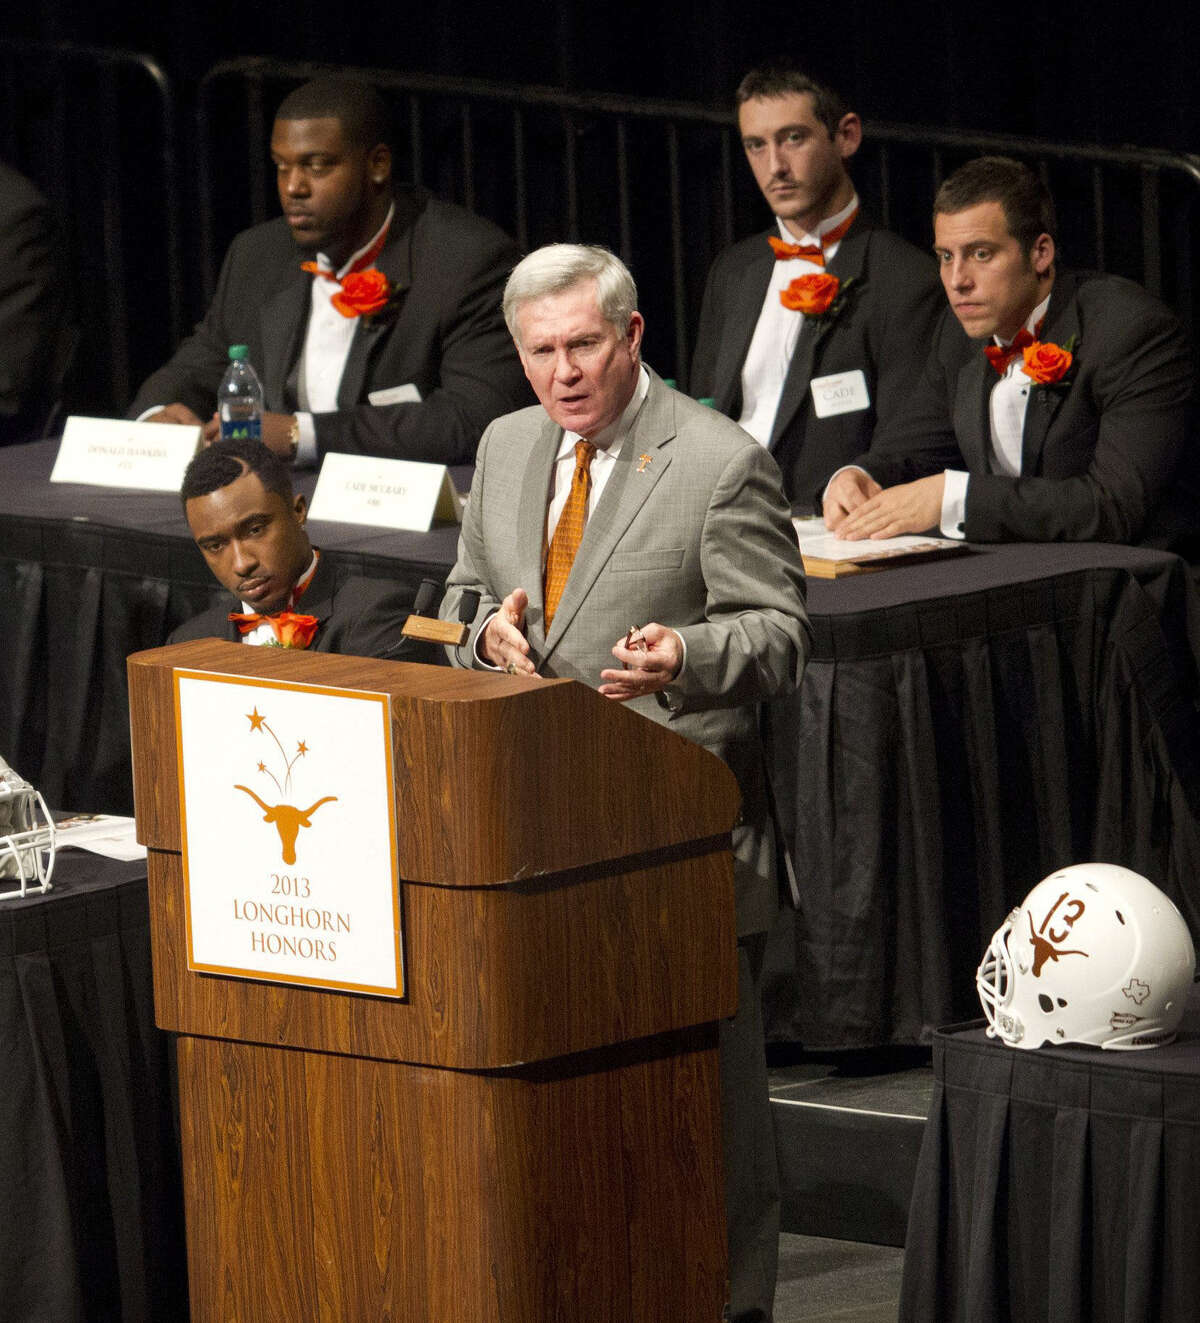 UT head coach Mack Brown addresses the crowd at the Austin honors banquet.